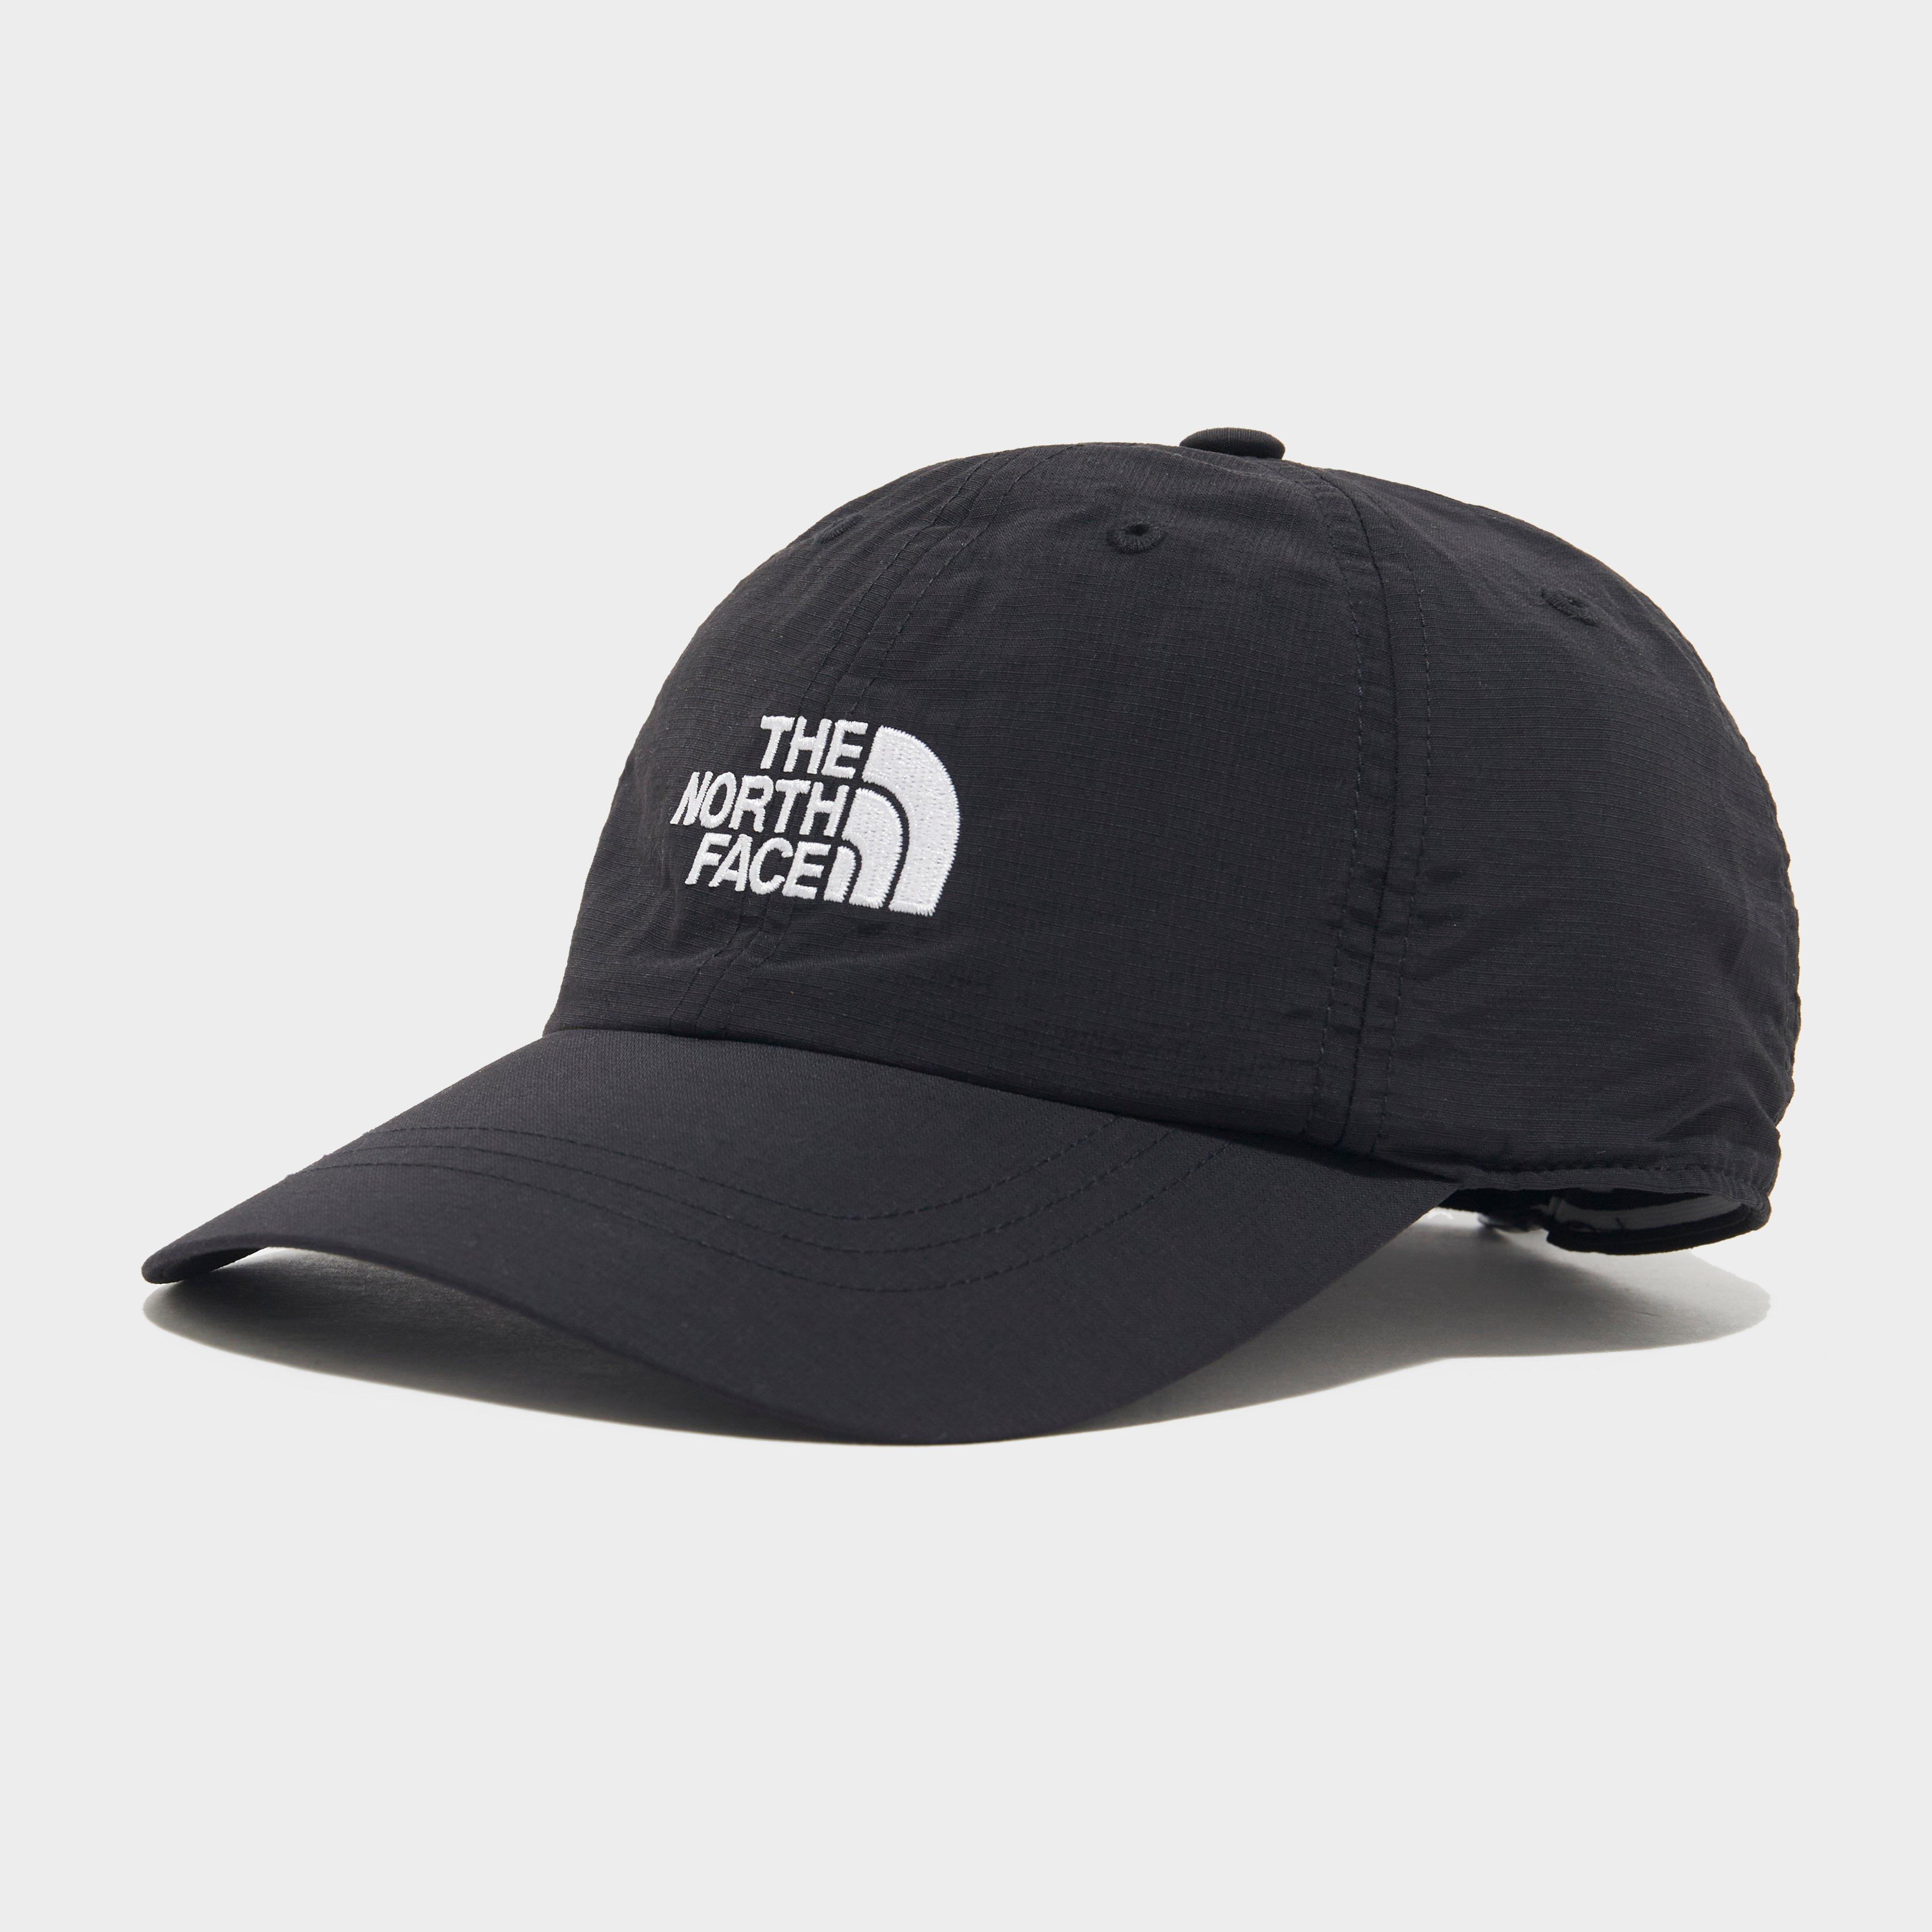 the north face cap Cheaper Than Retail Price> Buy Clothing, Accessories ...